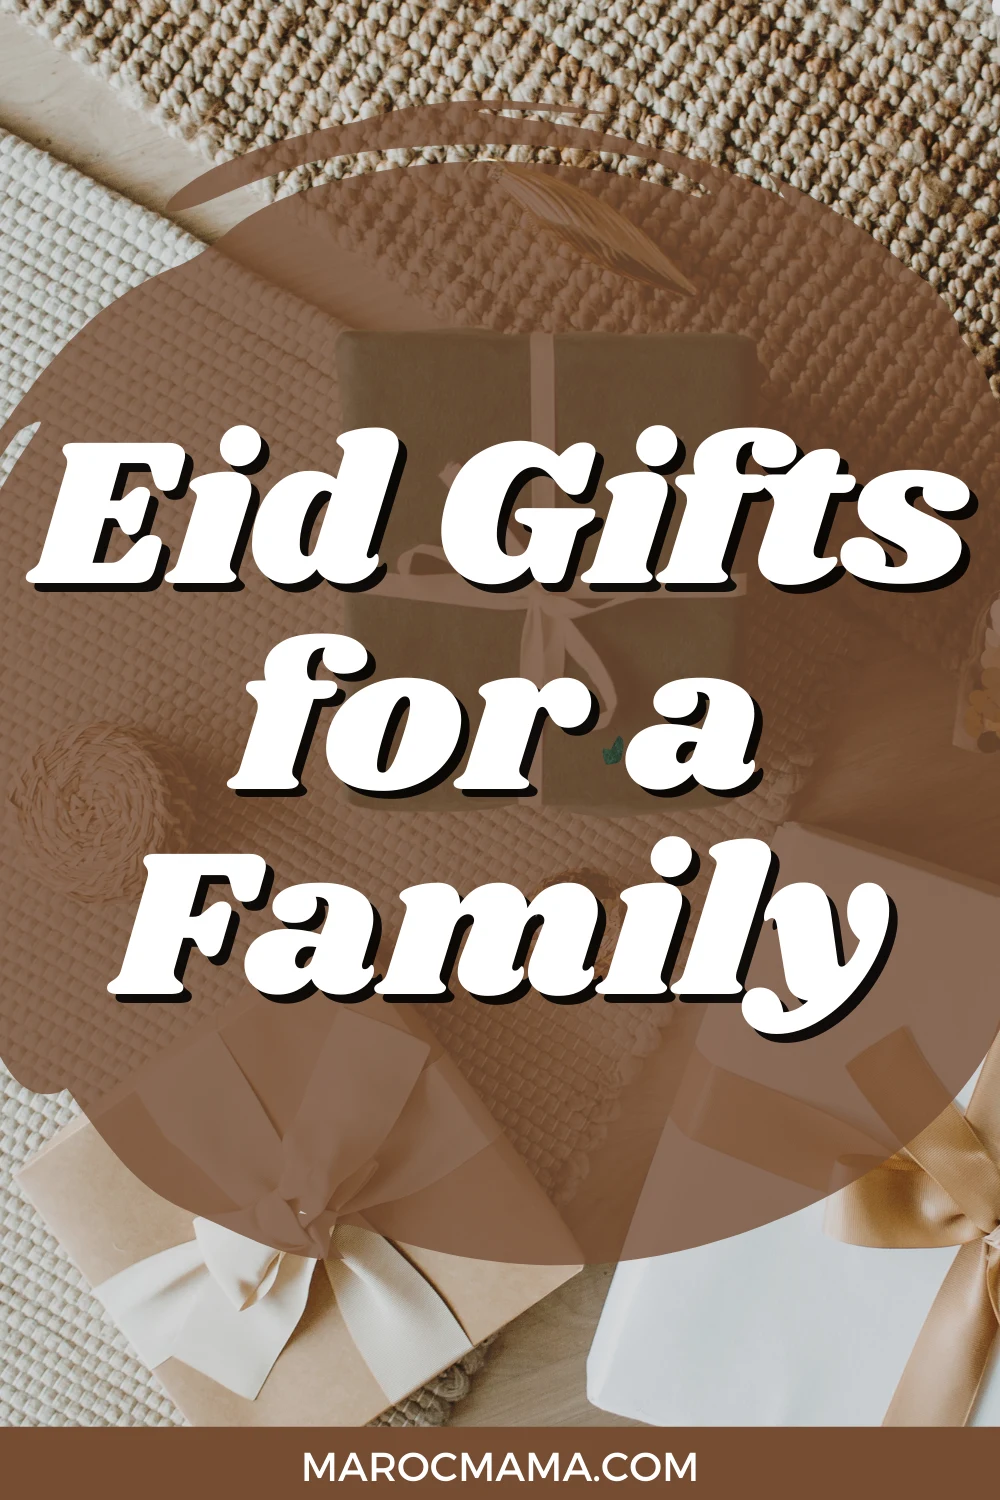 Various gift boxes wrapped in ribbons flat laid on a table with the text Eid Gifts for a Family